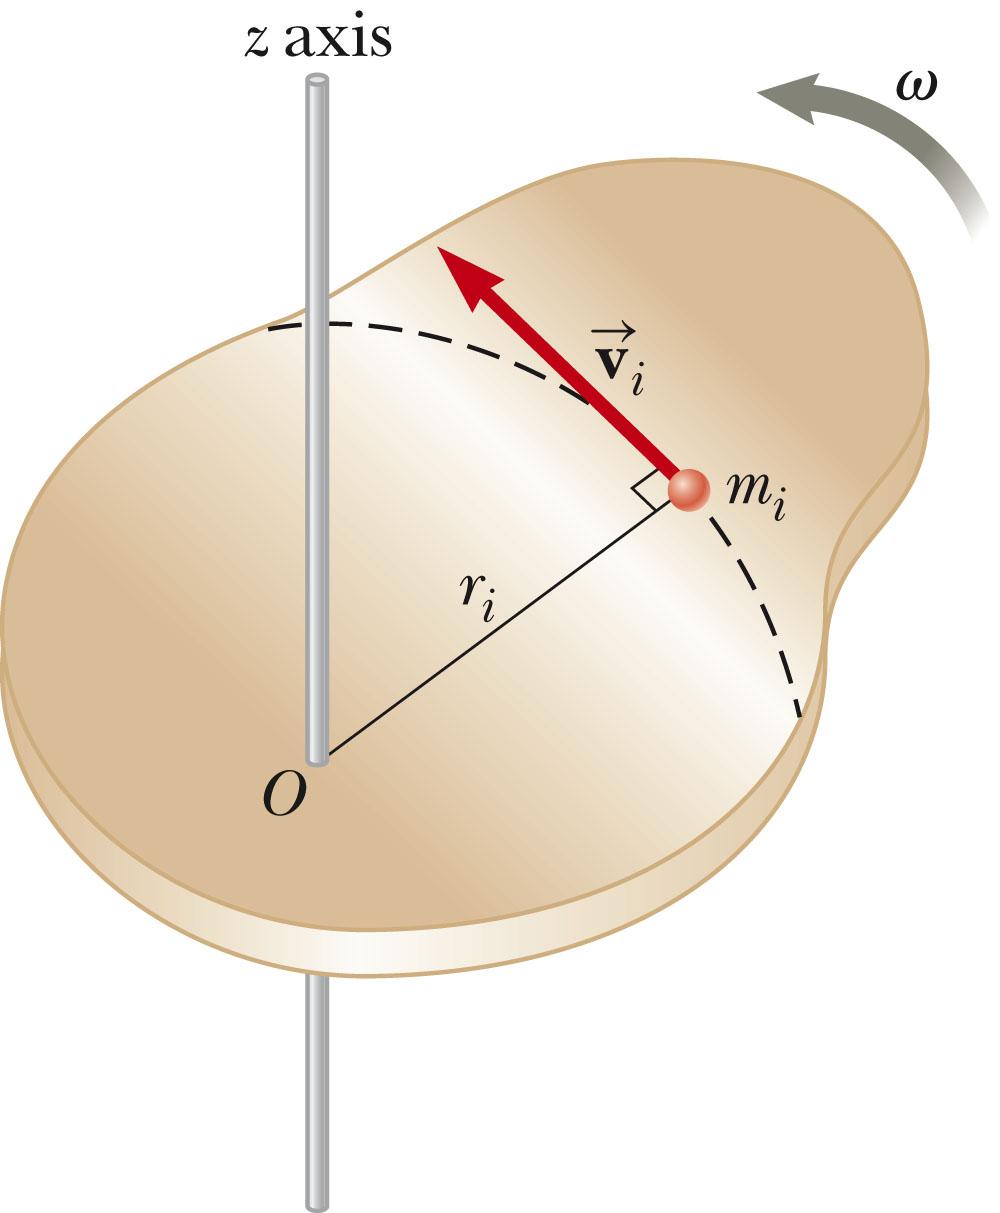 Review: Circular Motion q Circular motion: Angular velocity: = dθ/ Linear velocity: v = r, --- v always perpendicular to r q The acceleration has both a tangential and a centripetal components: The